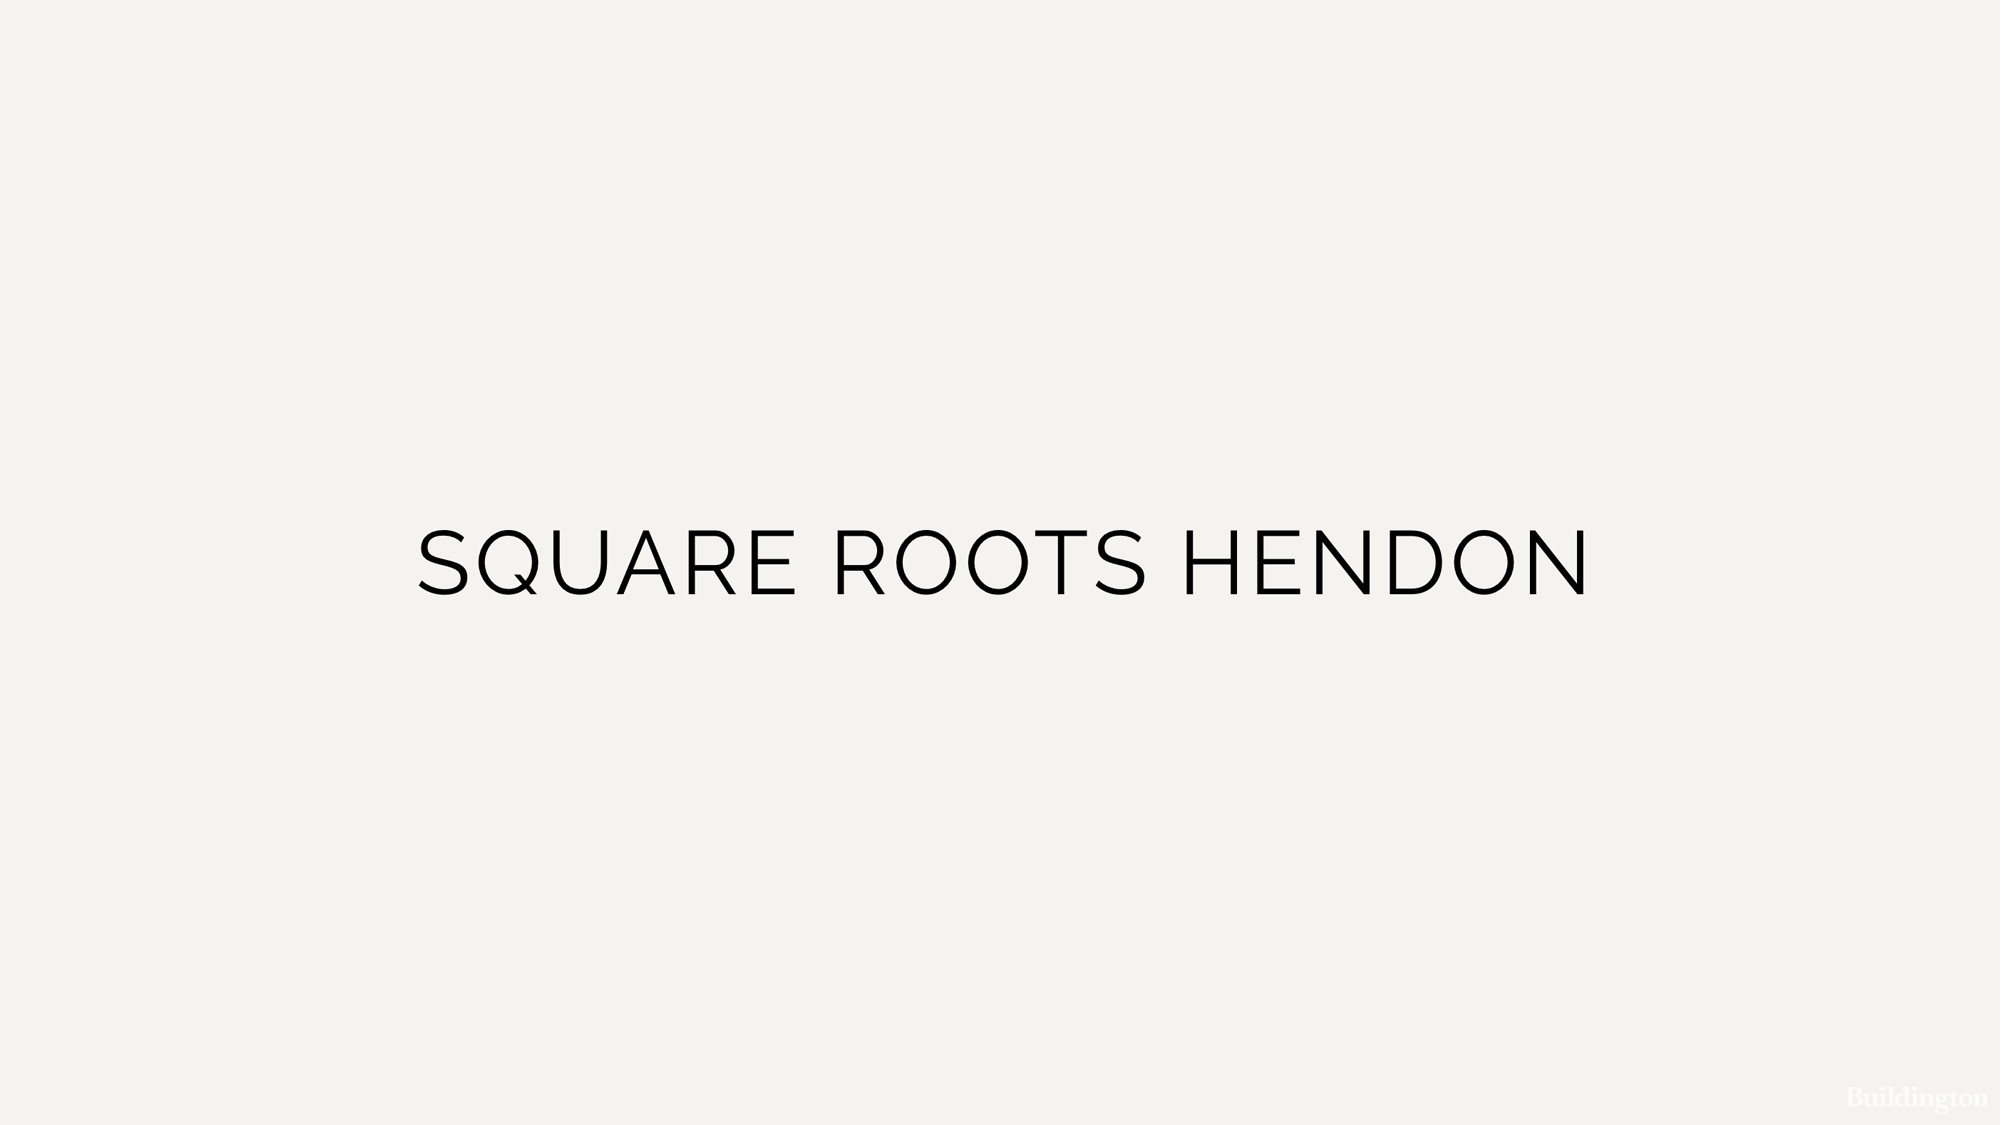 Square Roots Hendon